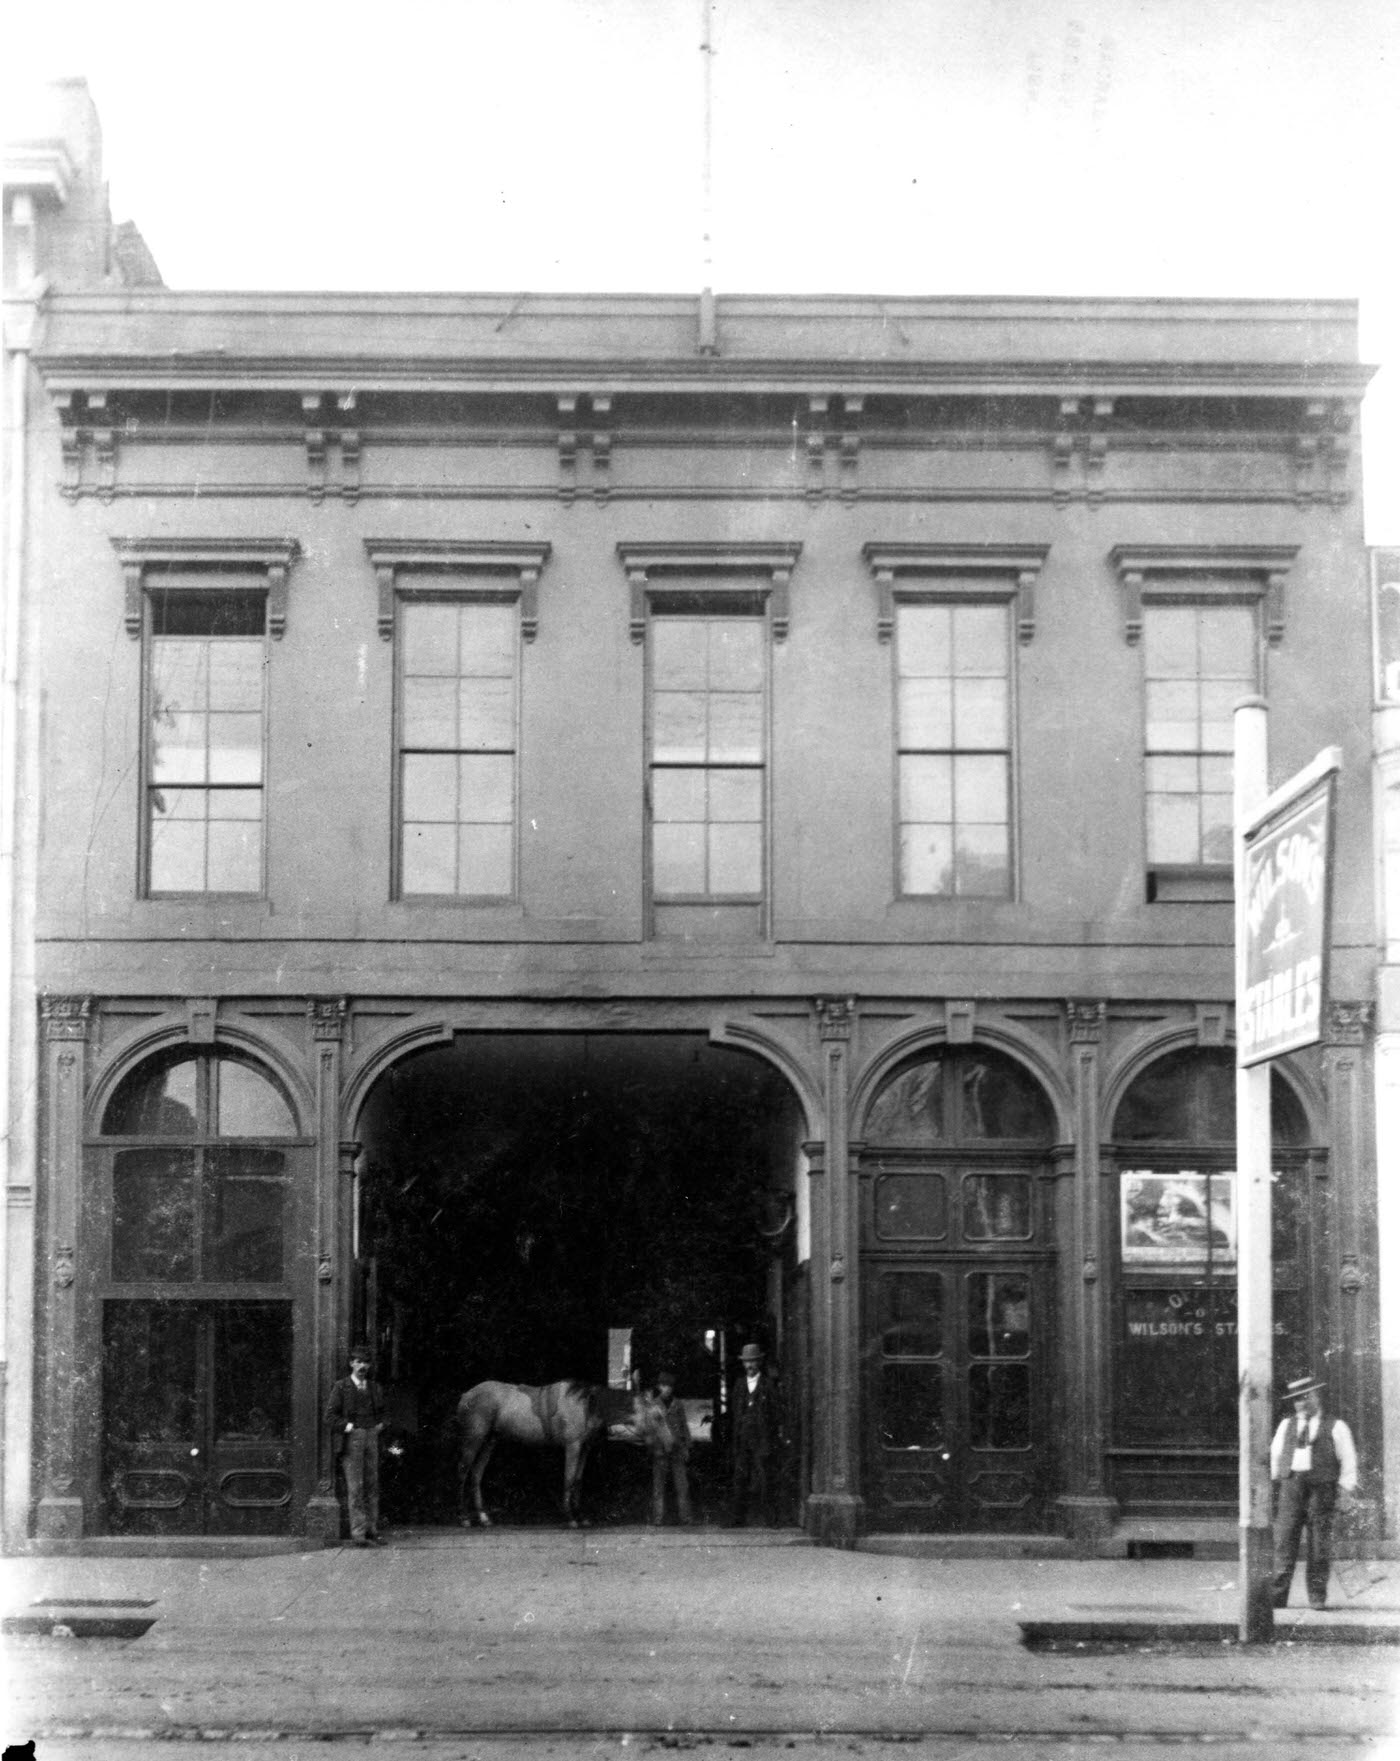 Wilson's Stables, 1895